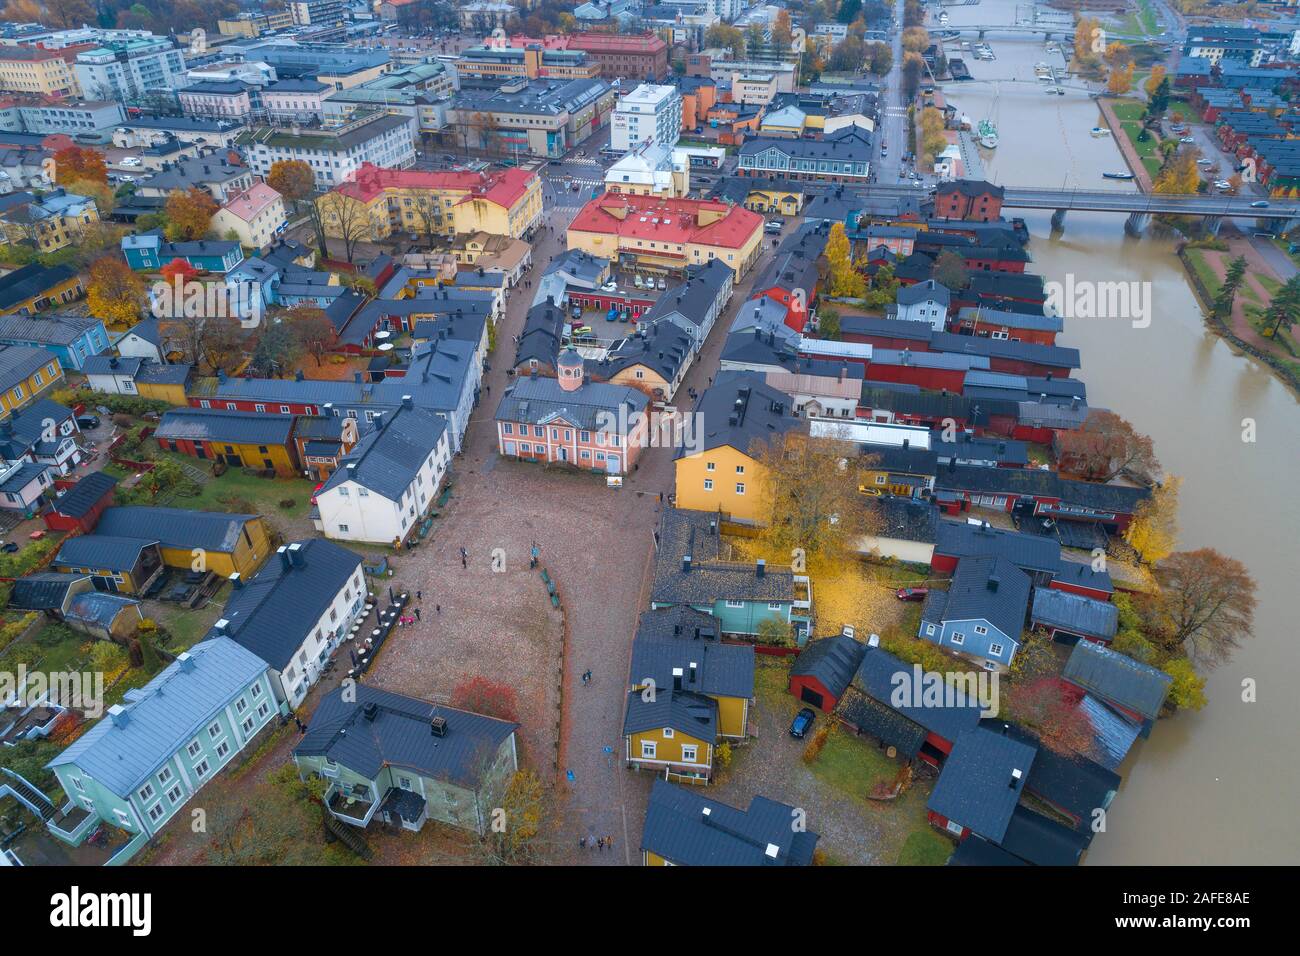 PORVOO, FINLAND - OCTOBER 19, 2019: Above the central square of old Porvoo on an October afternoon (aerial photography) Stock Photo